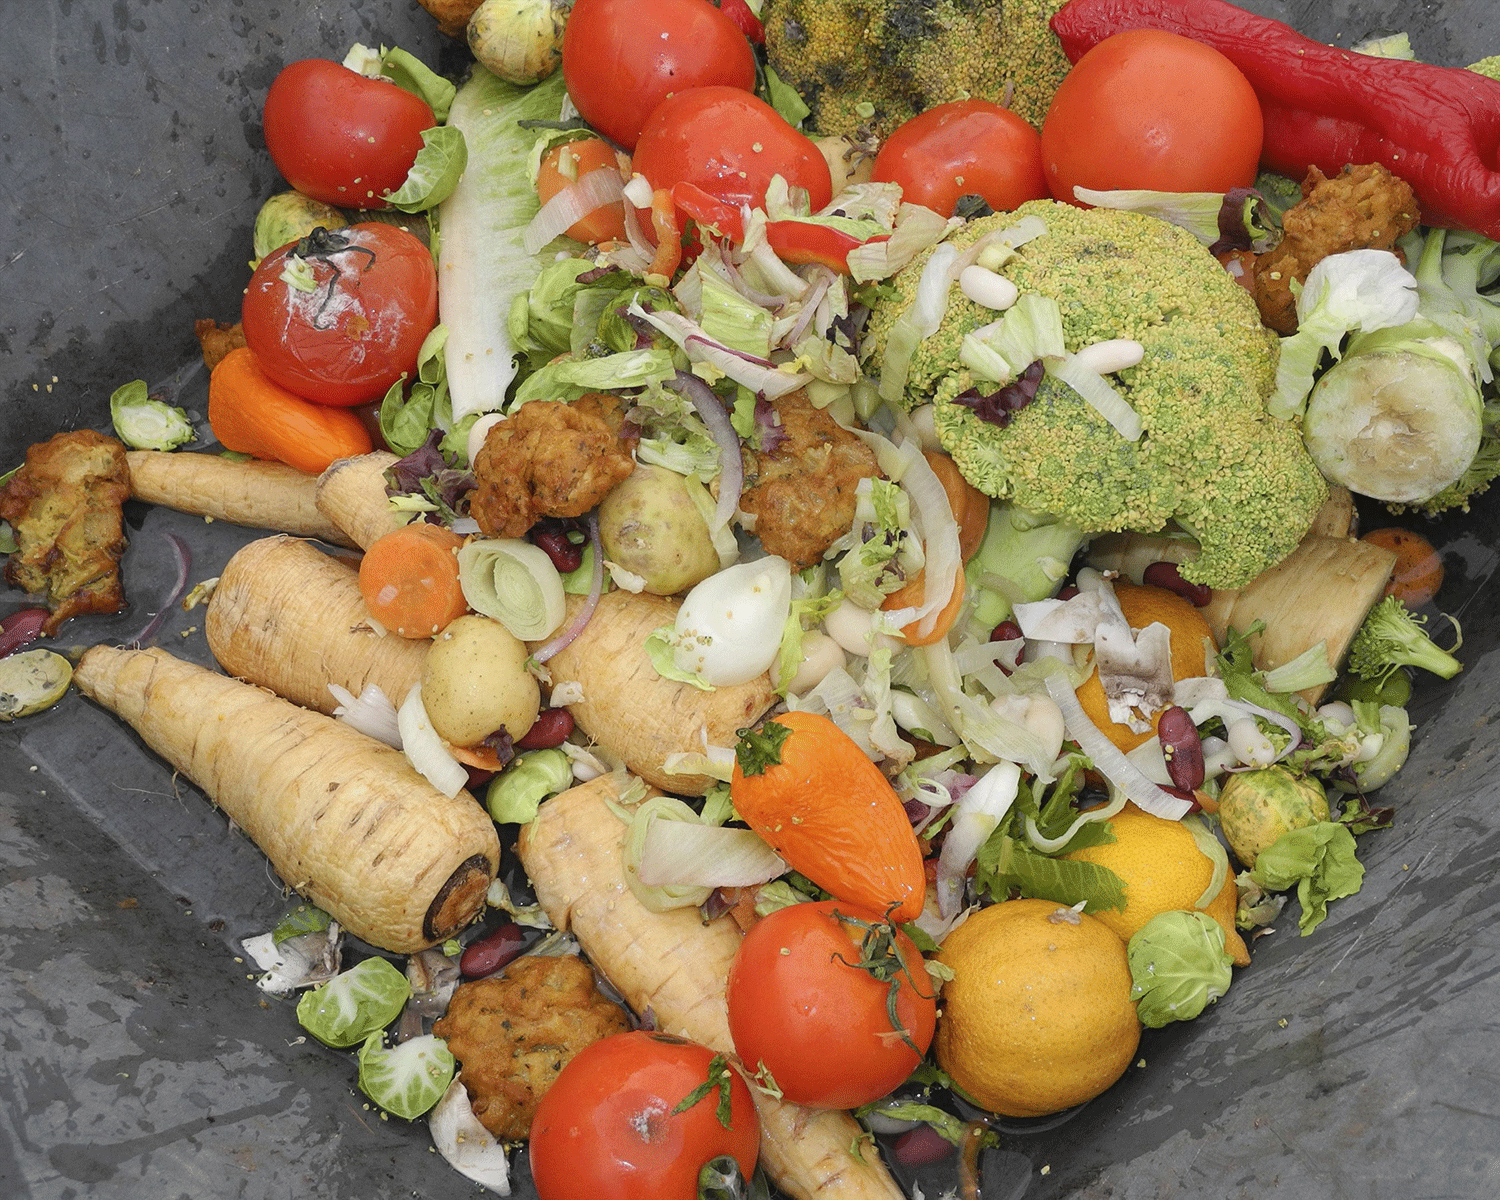 The UK is far worse than the rest of the EU when it comes to food waste